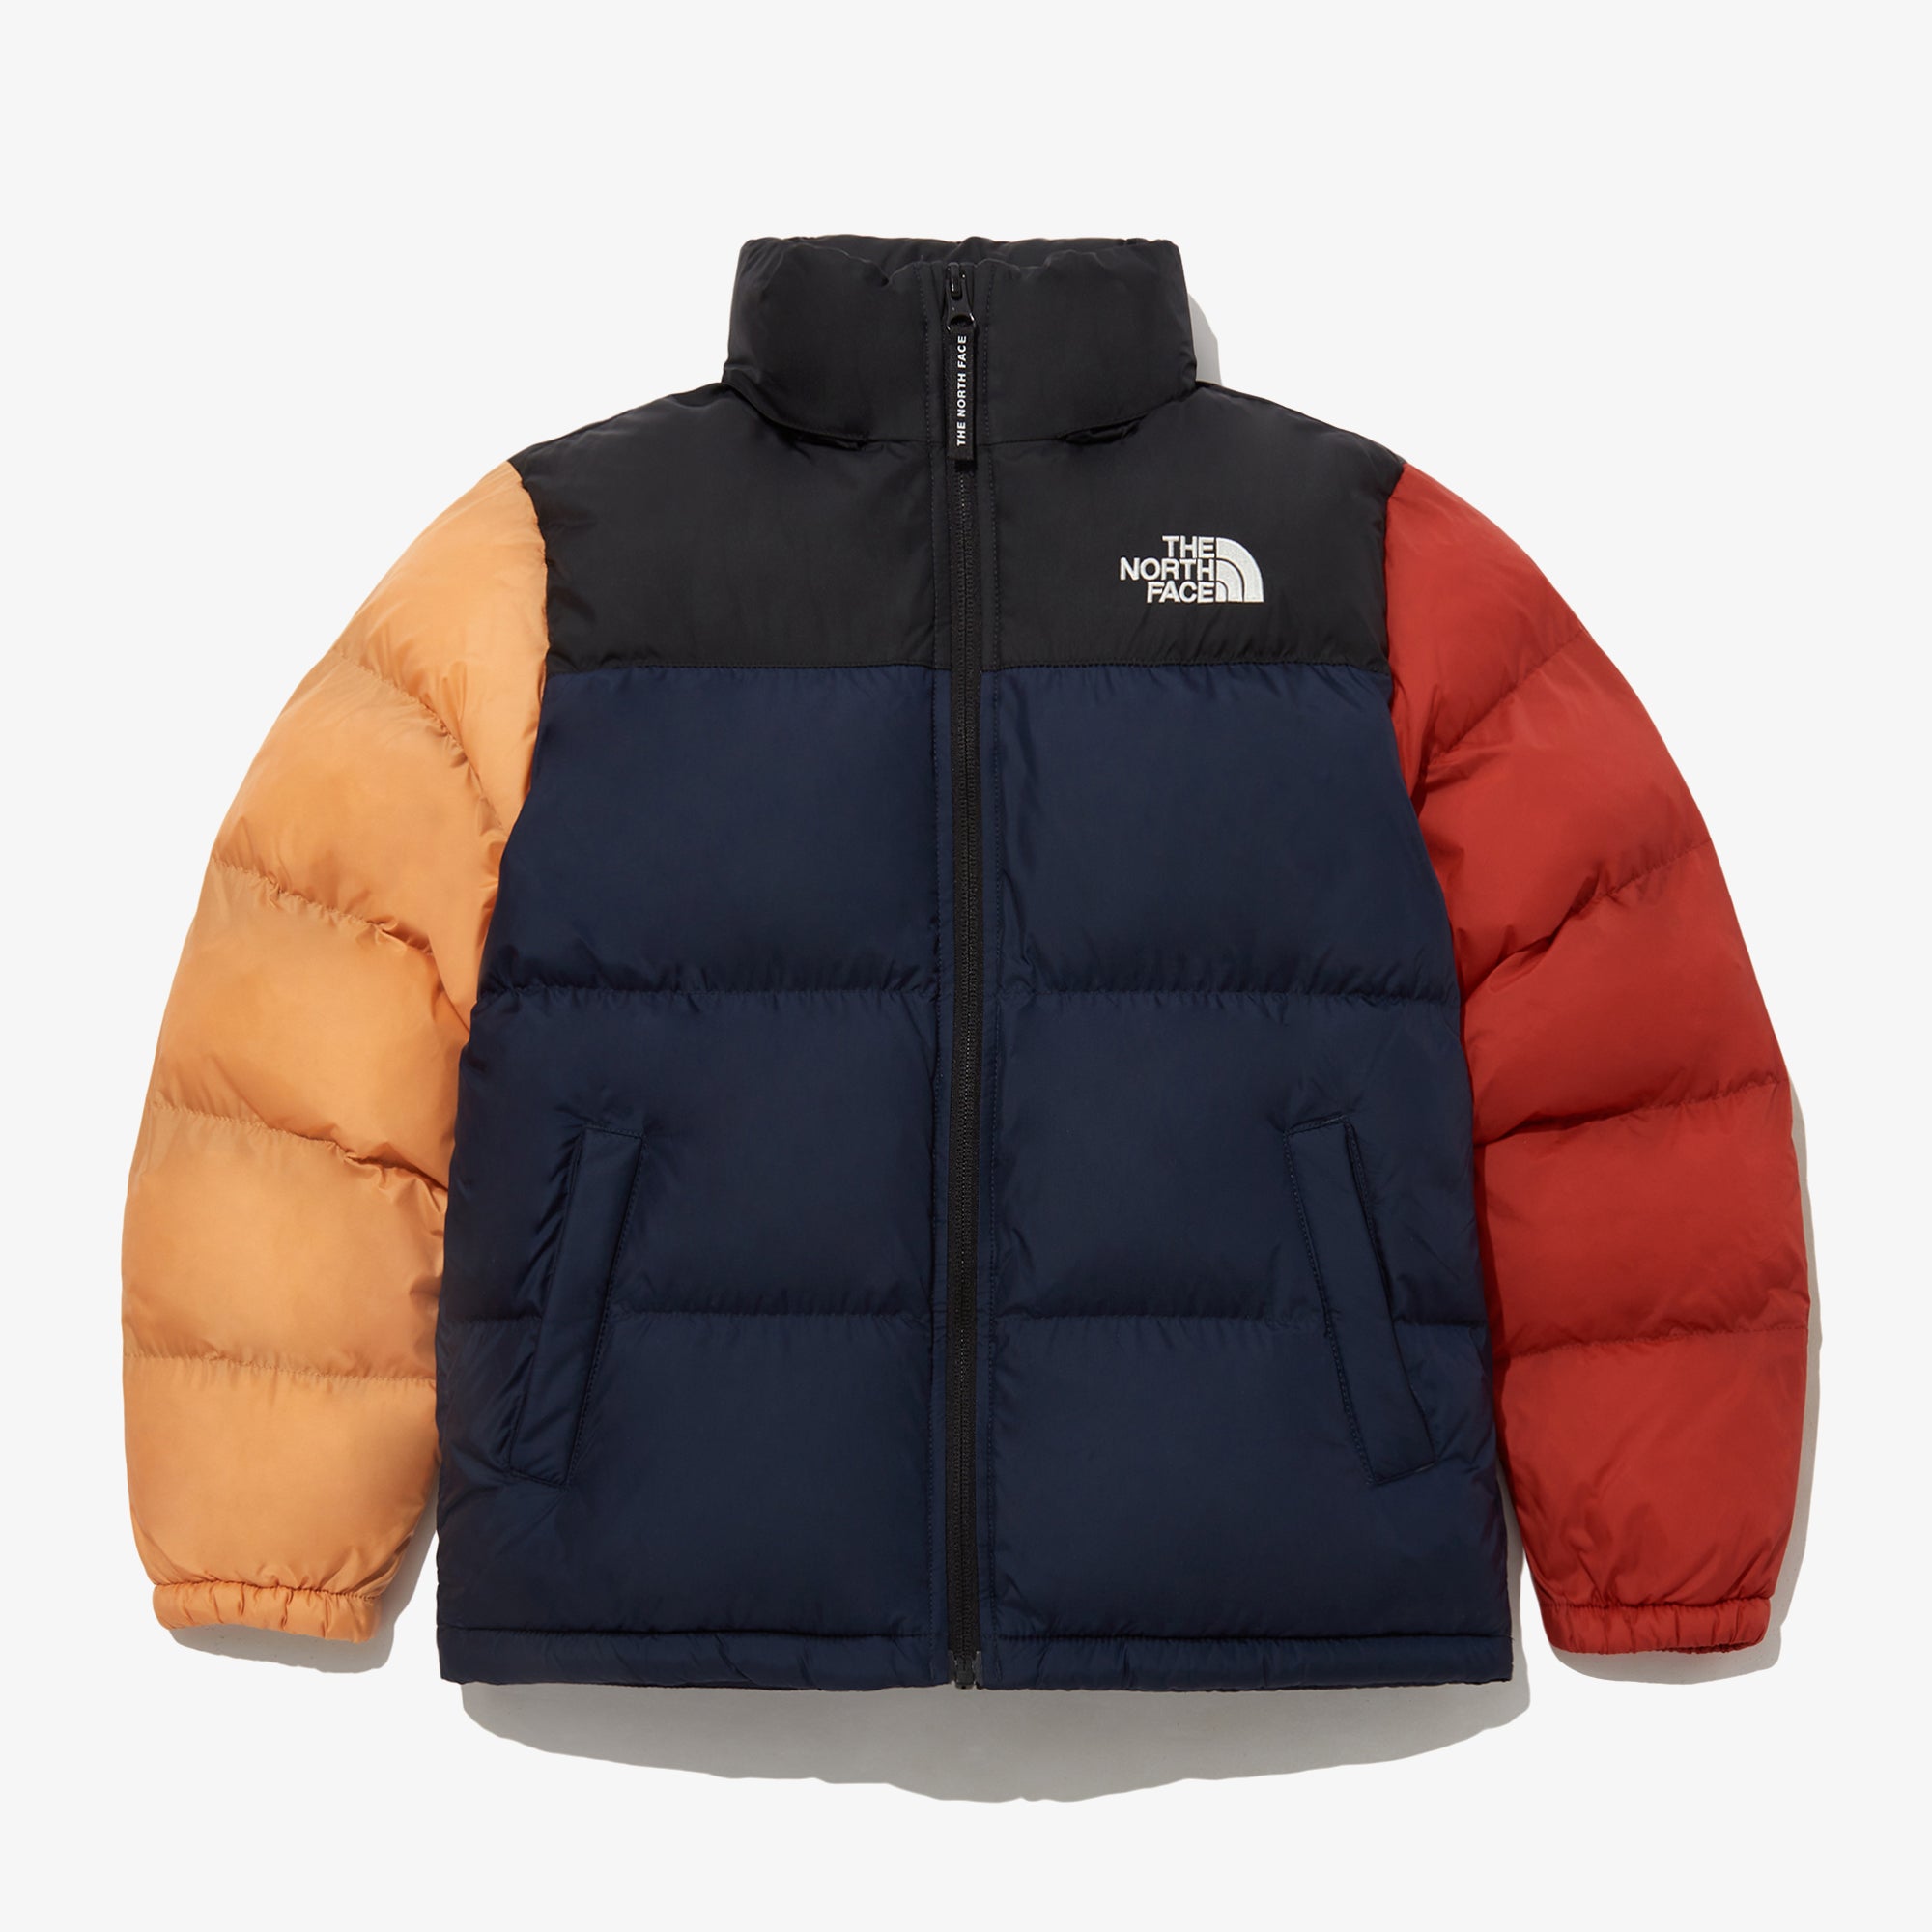 THE NORTH FACE] K'S NEW PUFFY JACKET NJ3NP51S Black